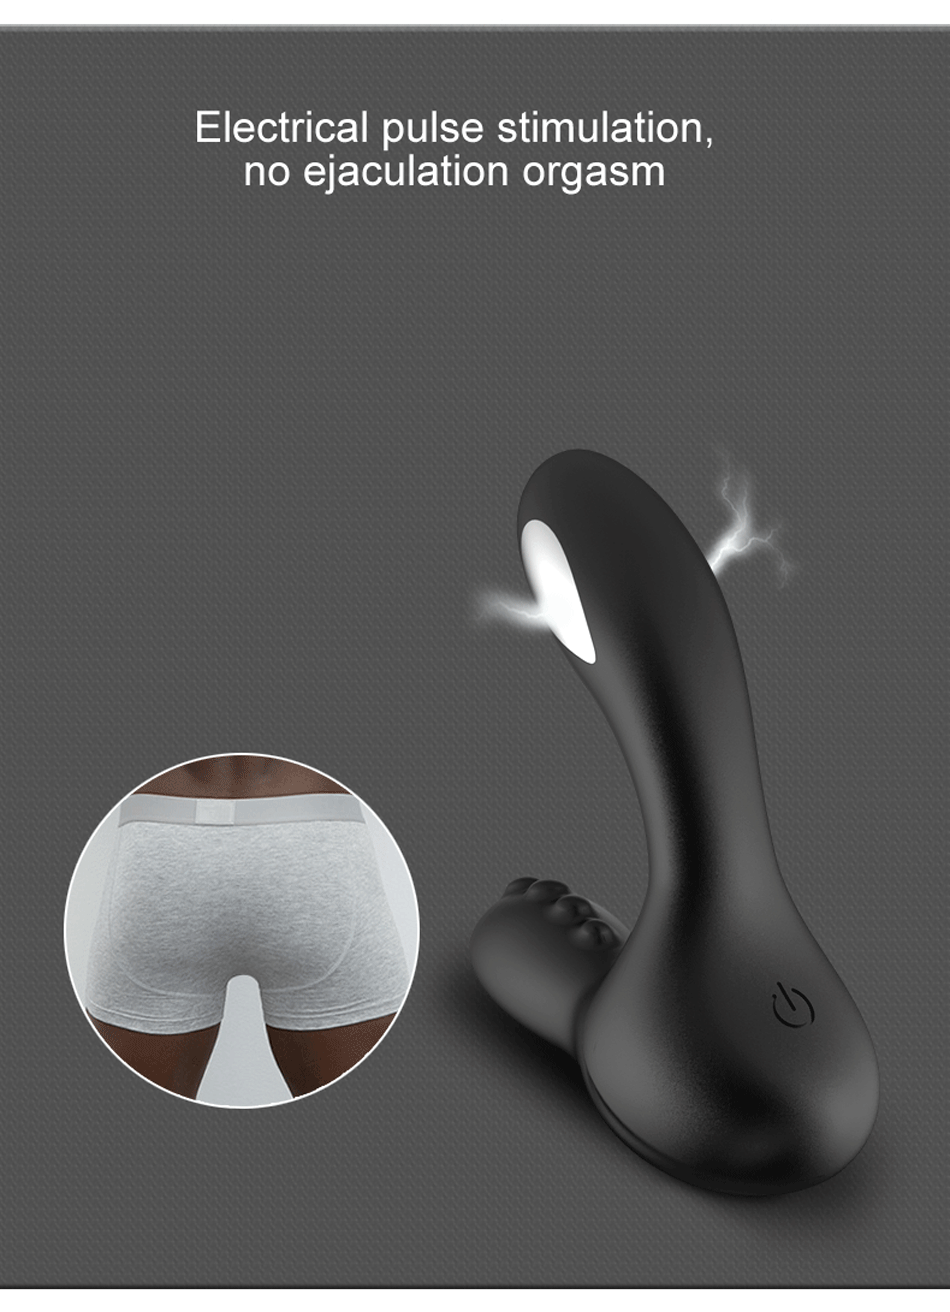 Electric Shock Prostate Massager Sex Toys